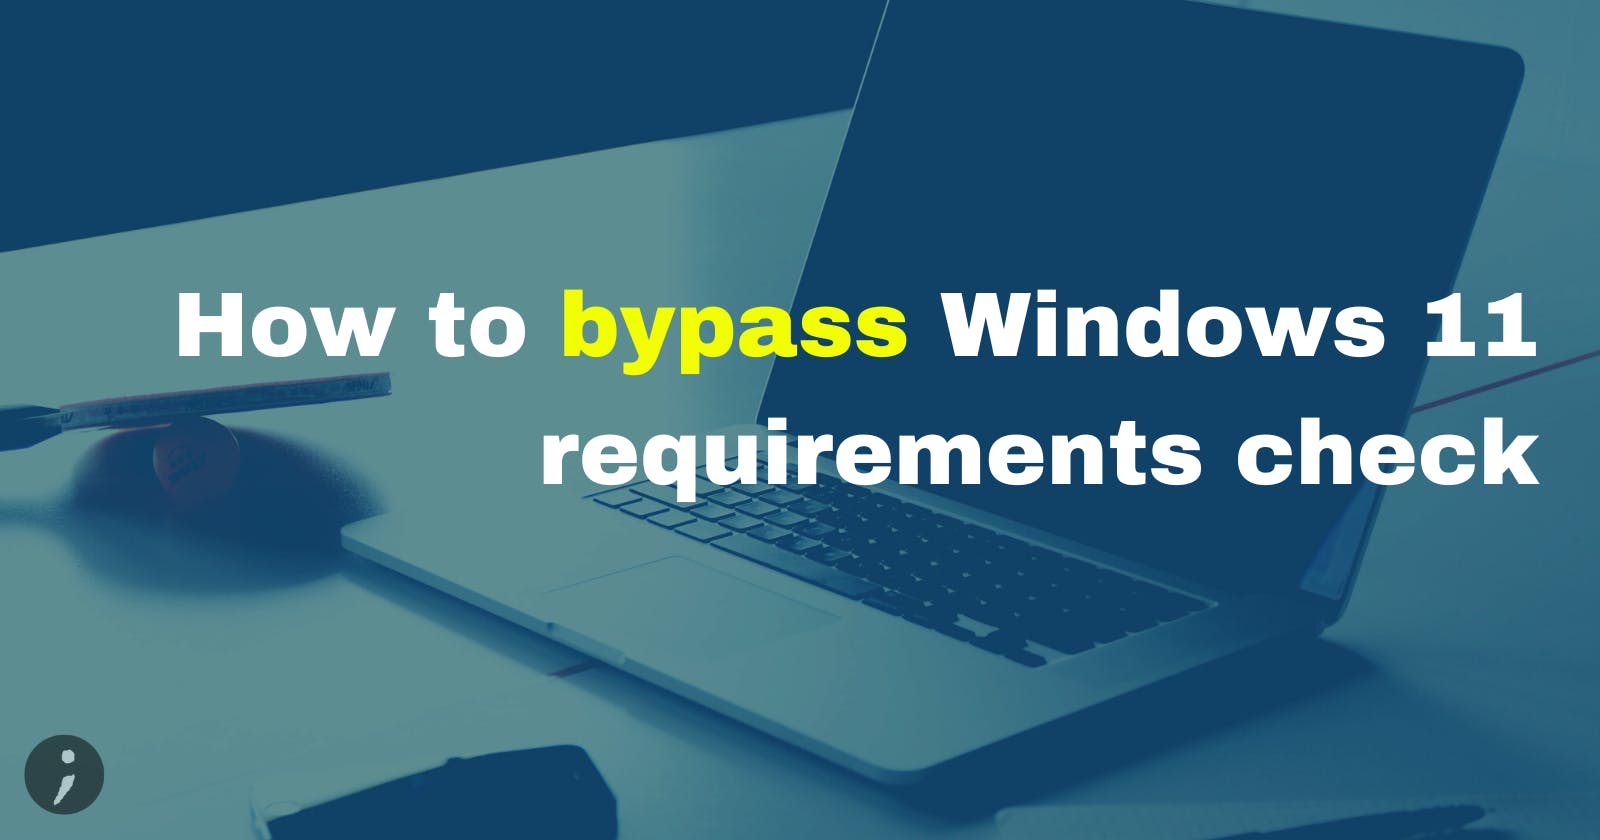 How to bypass Windows 11 requirements check